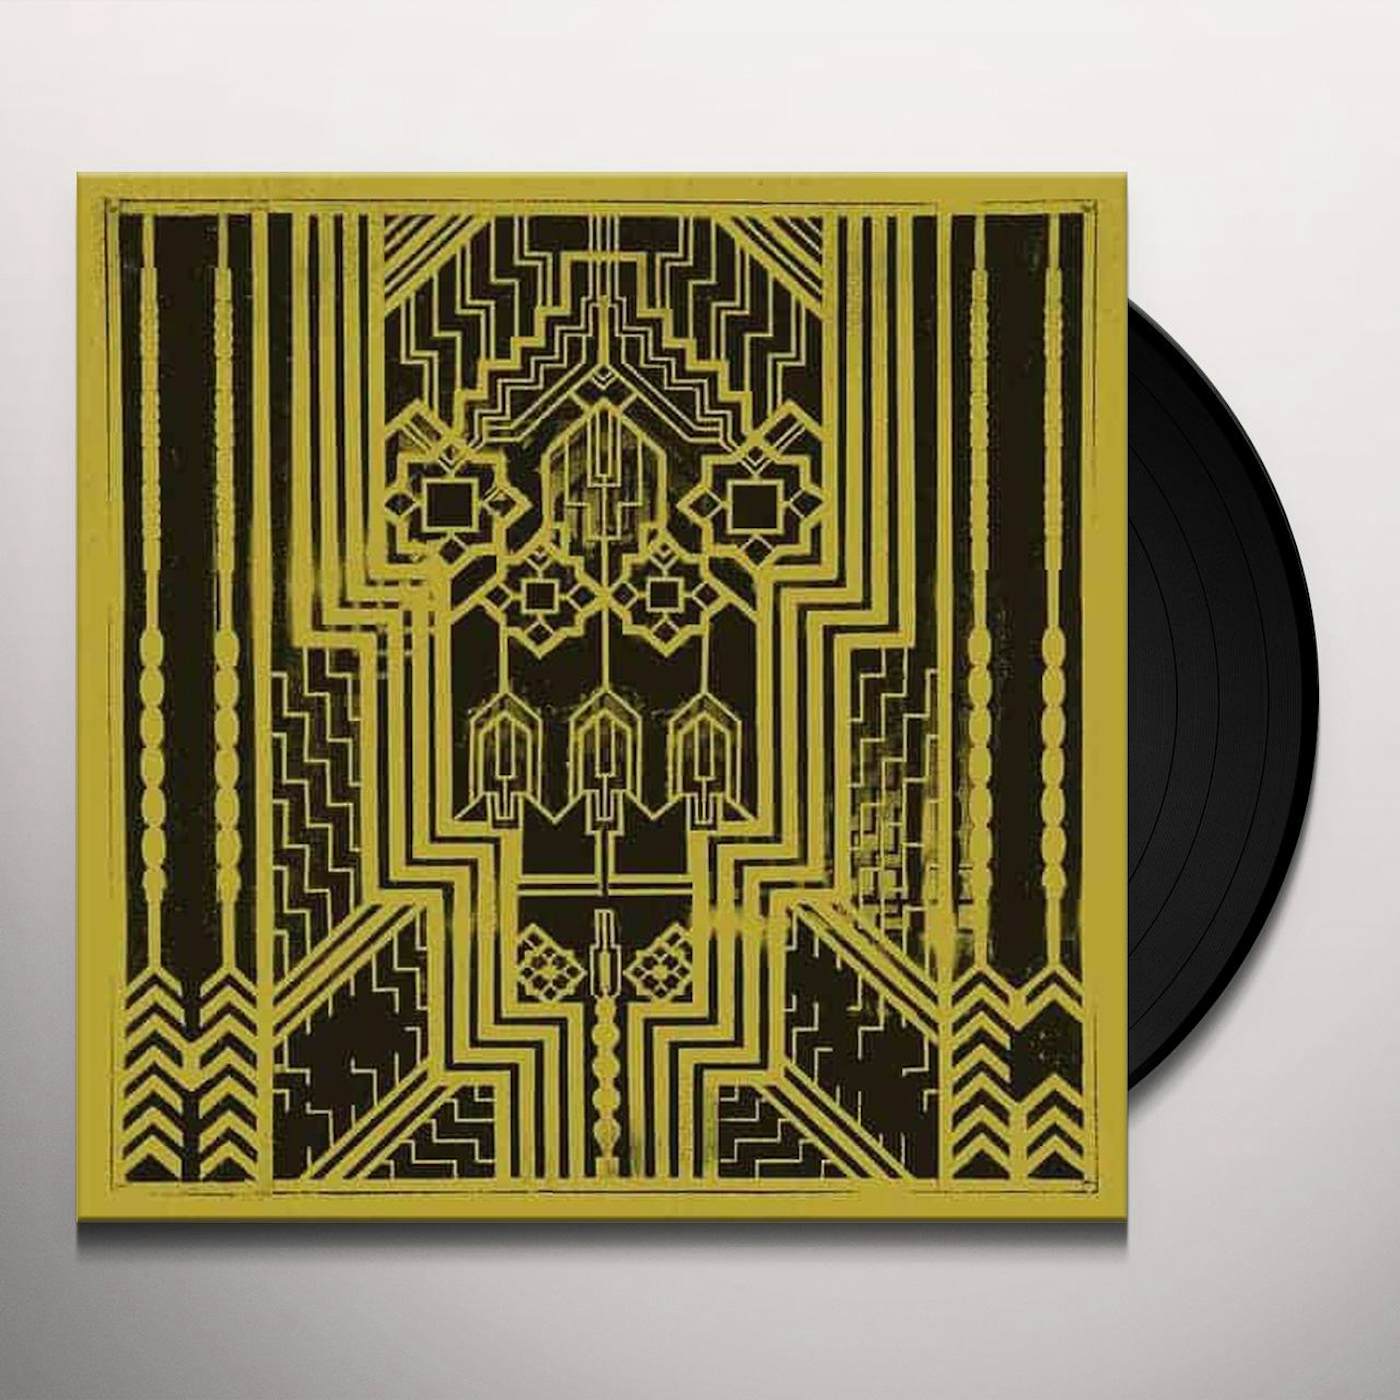 Hey Colossus In Black & Gold Vinyl Record